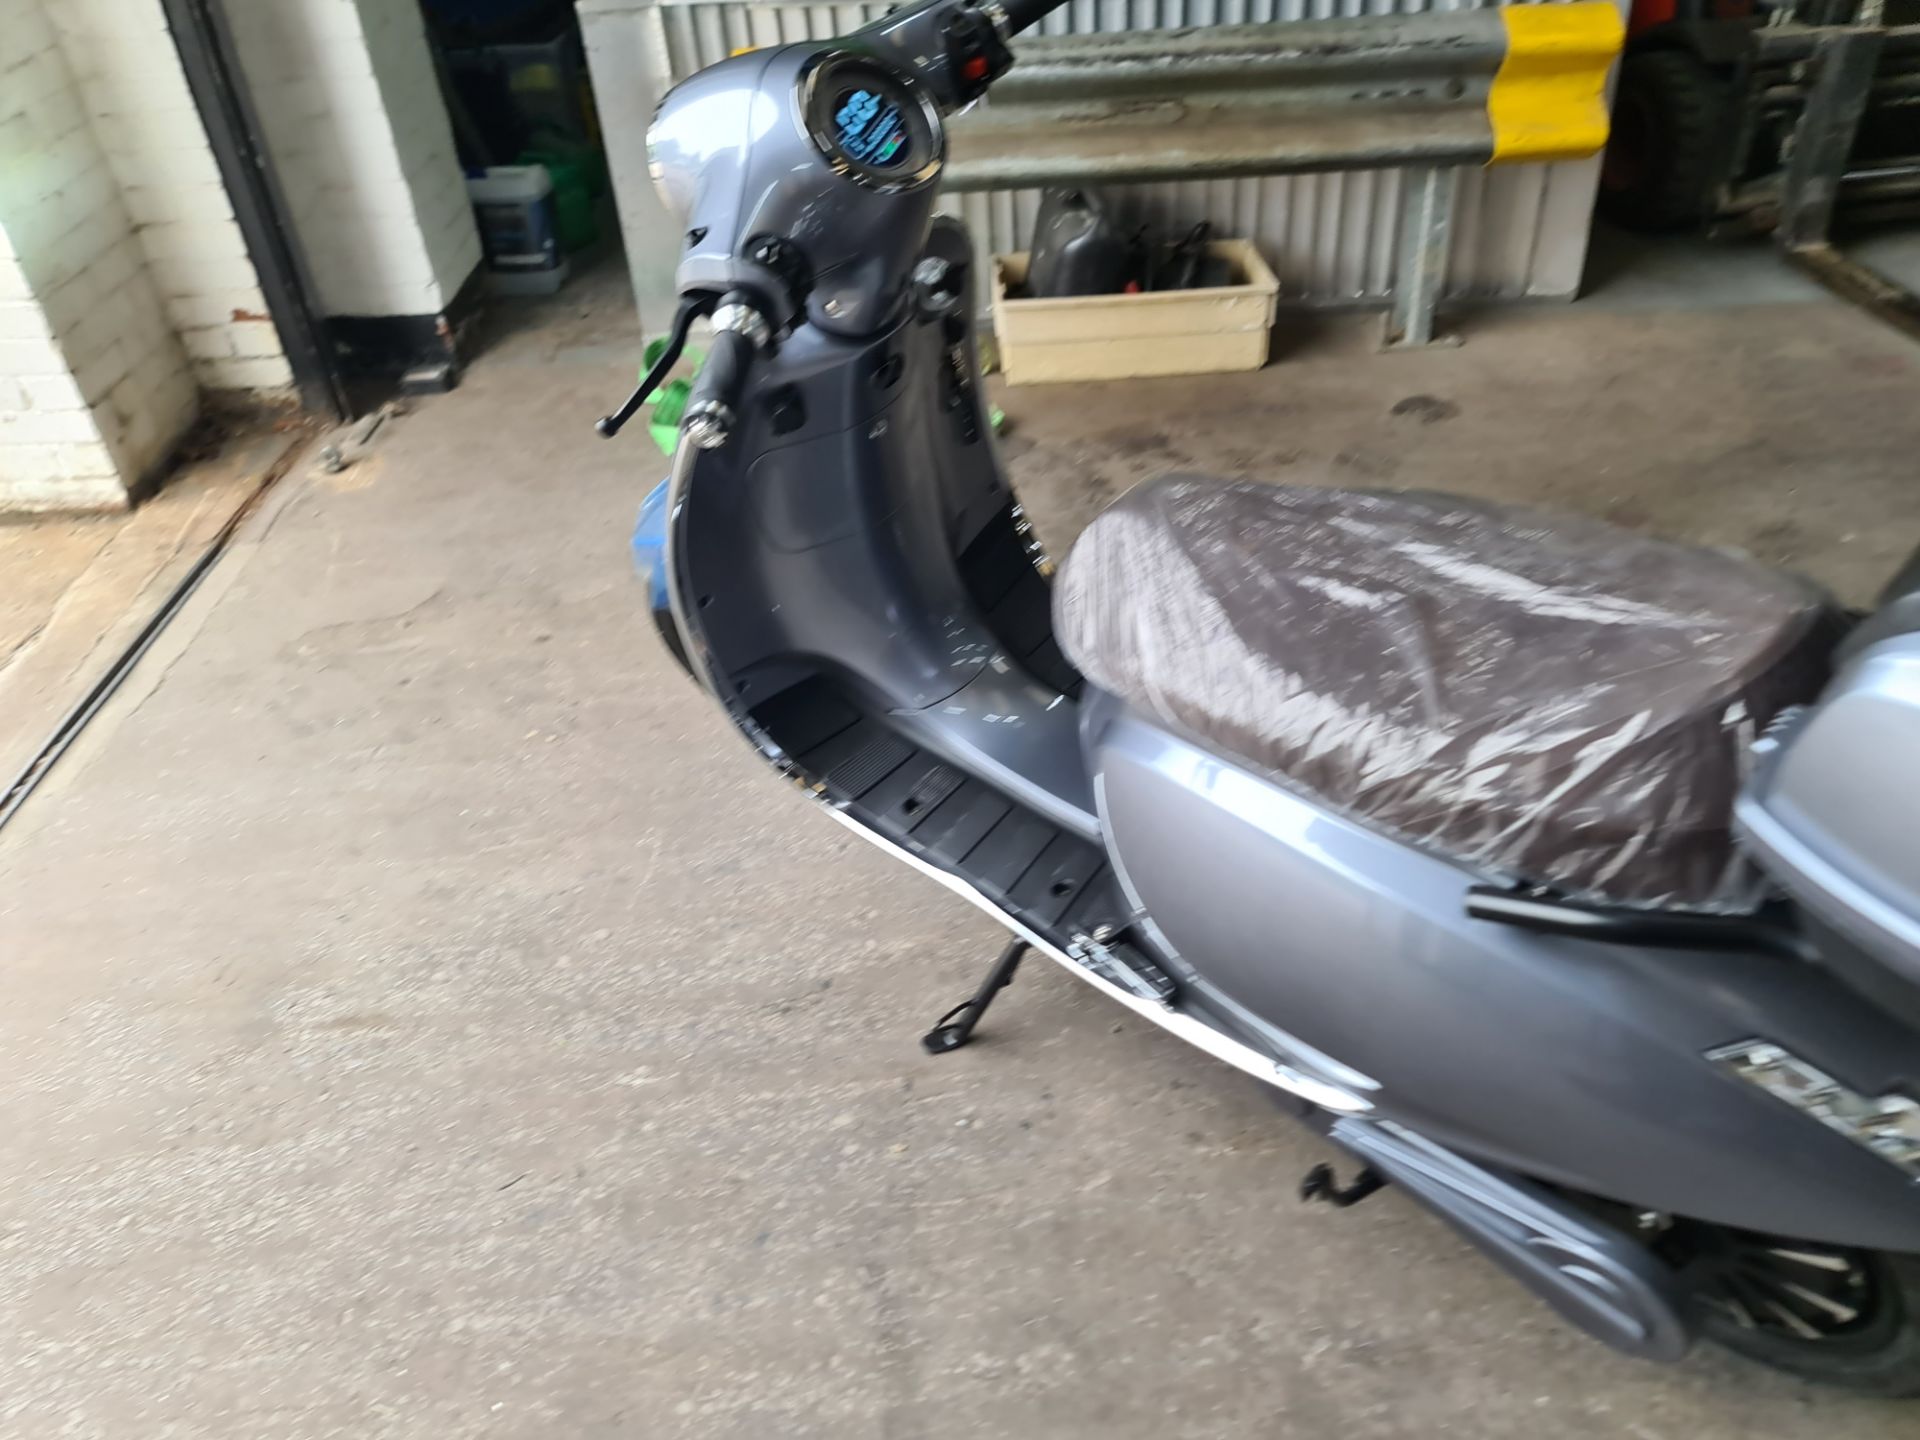 LR23 GVZ Ultra 4000 electric scooter, colour: grey, 125cc equivalent, 50mph top speed, 50 mile range - Image 18 of 28